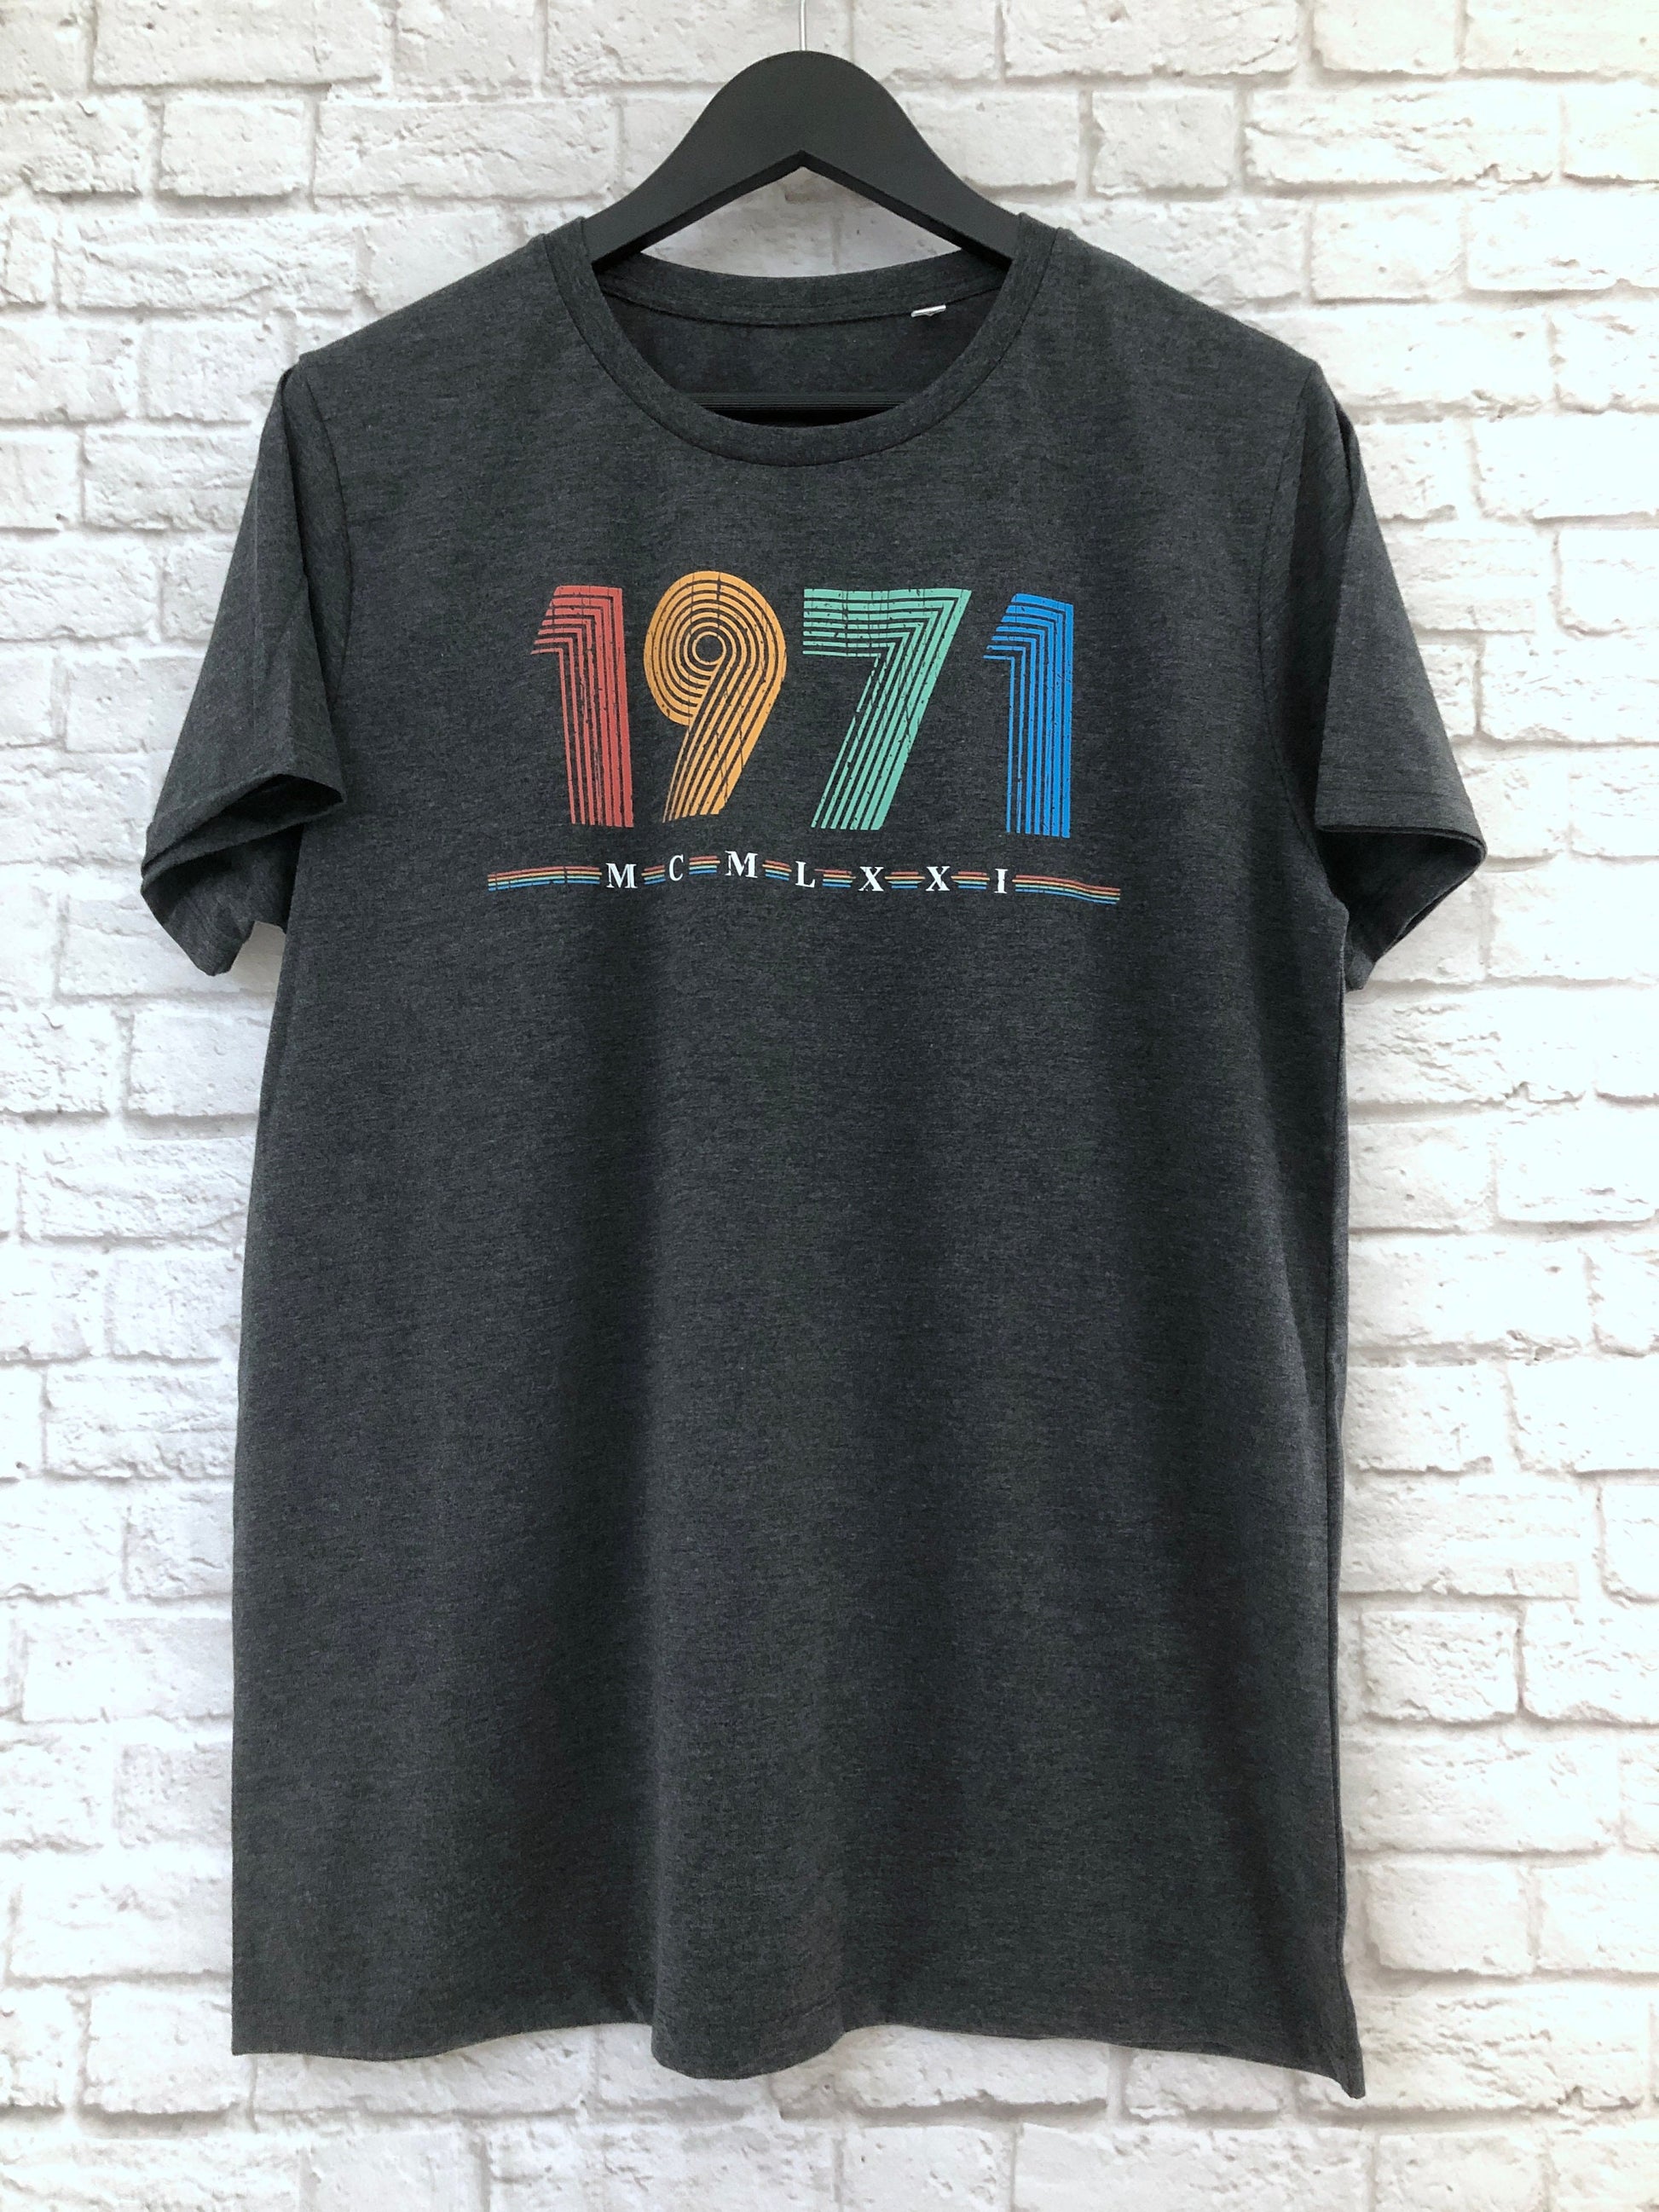 1971 T Shirt, 51st Birthday Gift T-Shirt in Retro & Vintage 70s style, MCMLXXI Fiftieth Bday Tee Shirt Top For Men or Women